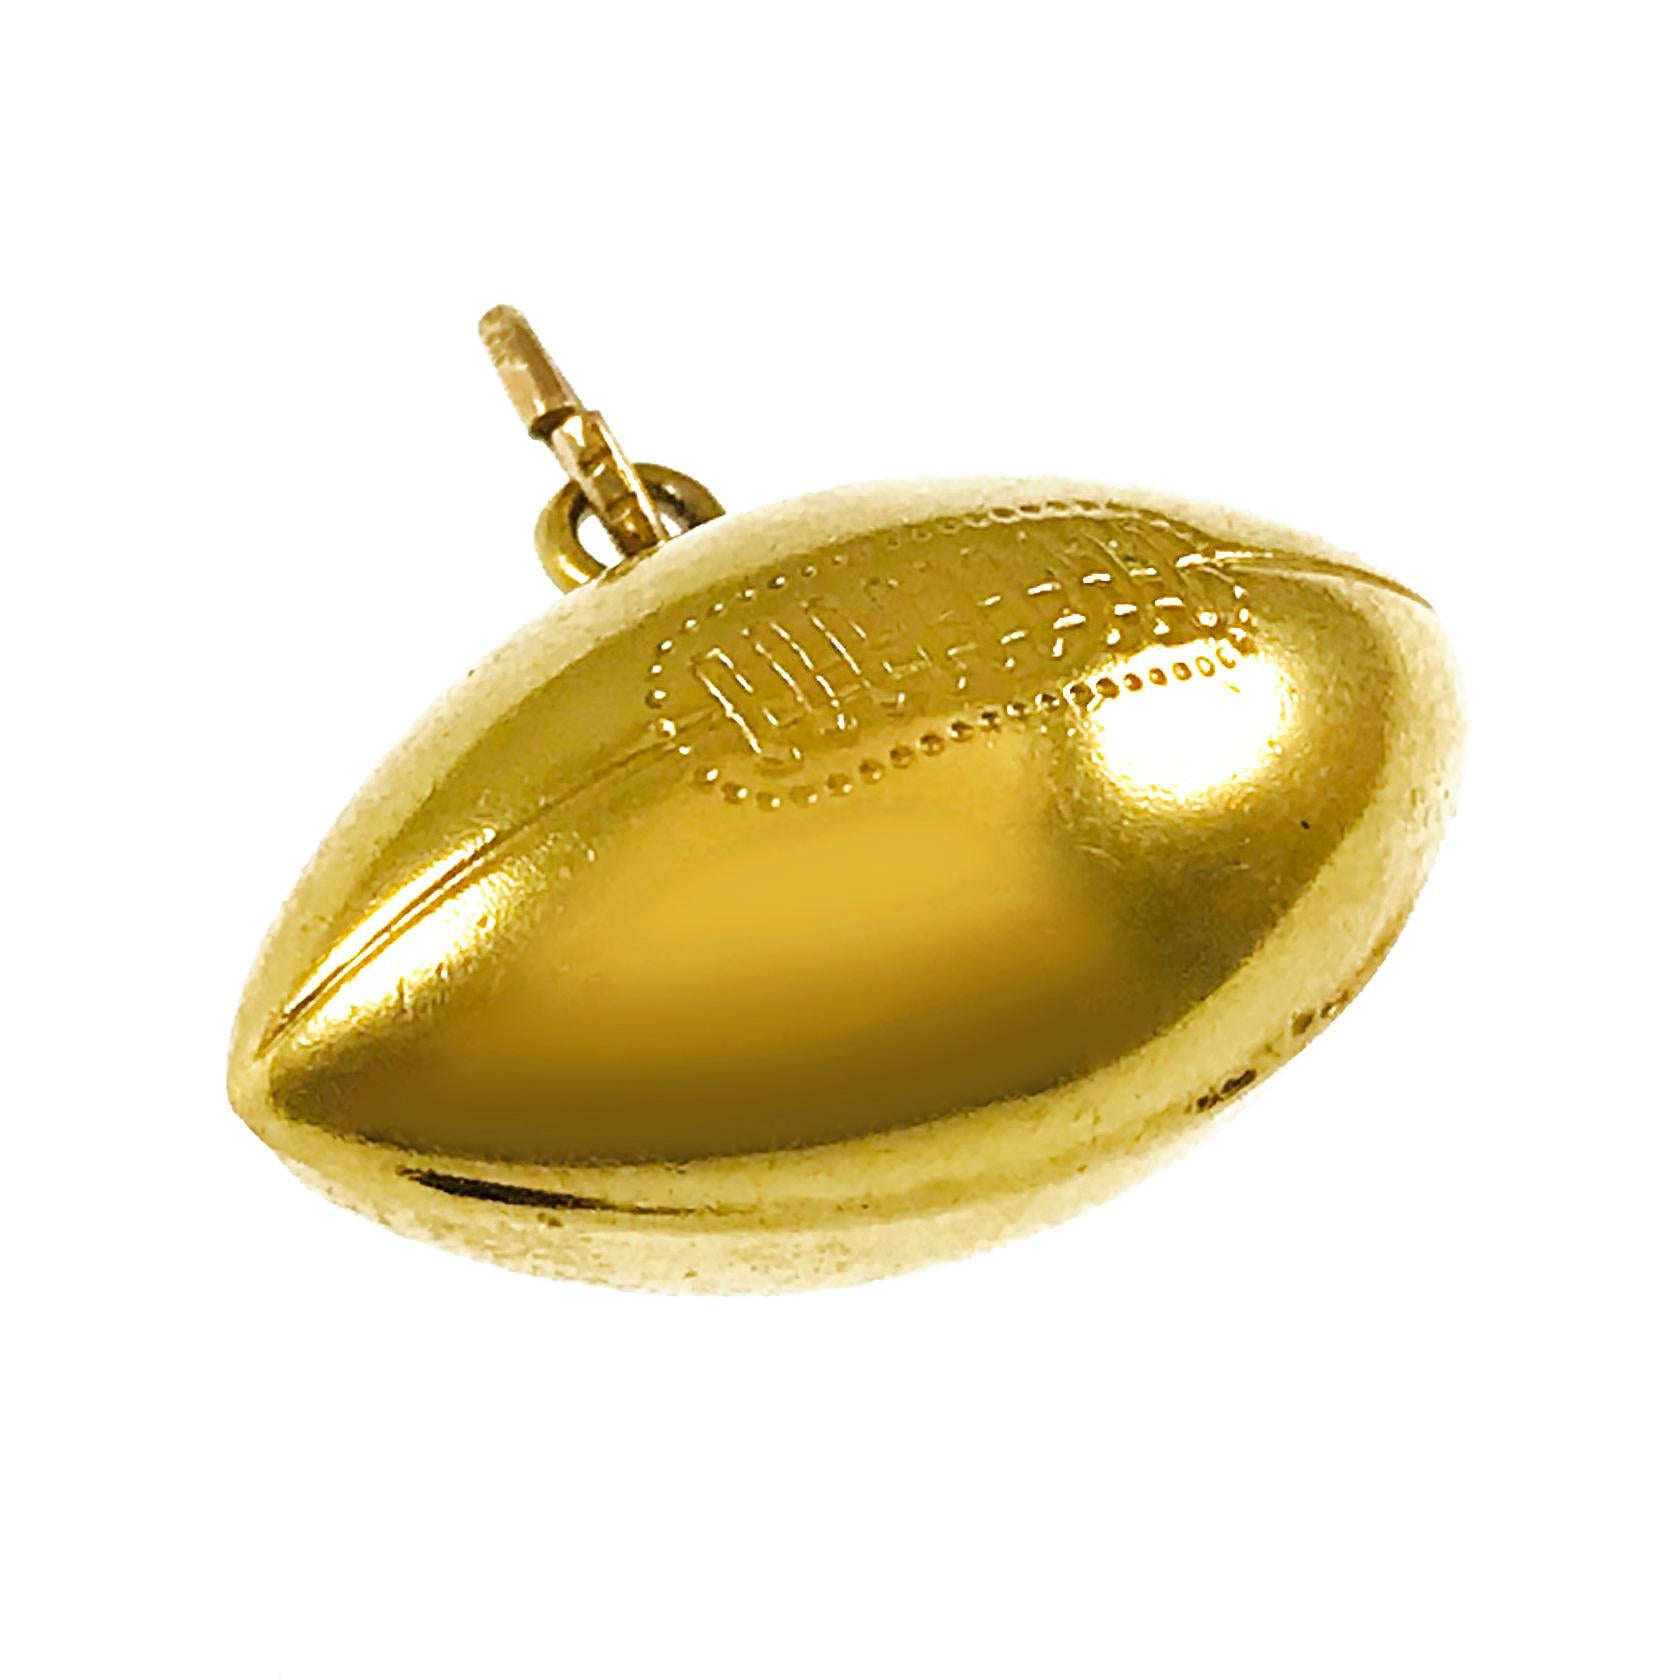 14 Karat Gold Football Pendant. The pendant has detailed laces and seams and an overall smooth finish. The pendant measures 14.65mm tall x 10.9mm wide x 22.0mm long. This vintage pendant/charm weighs 2.6 grams.